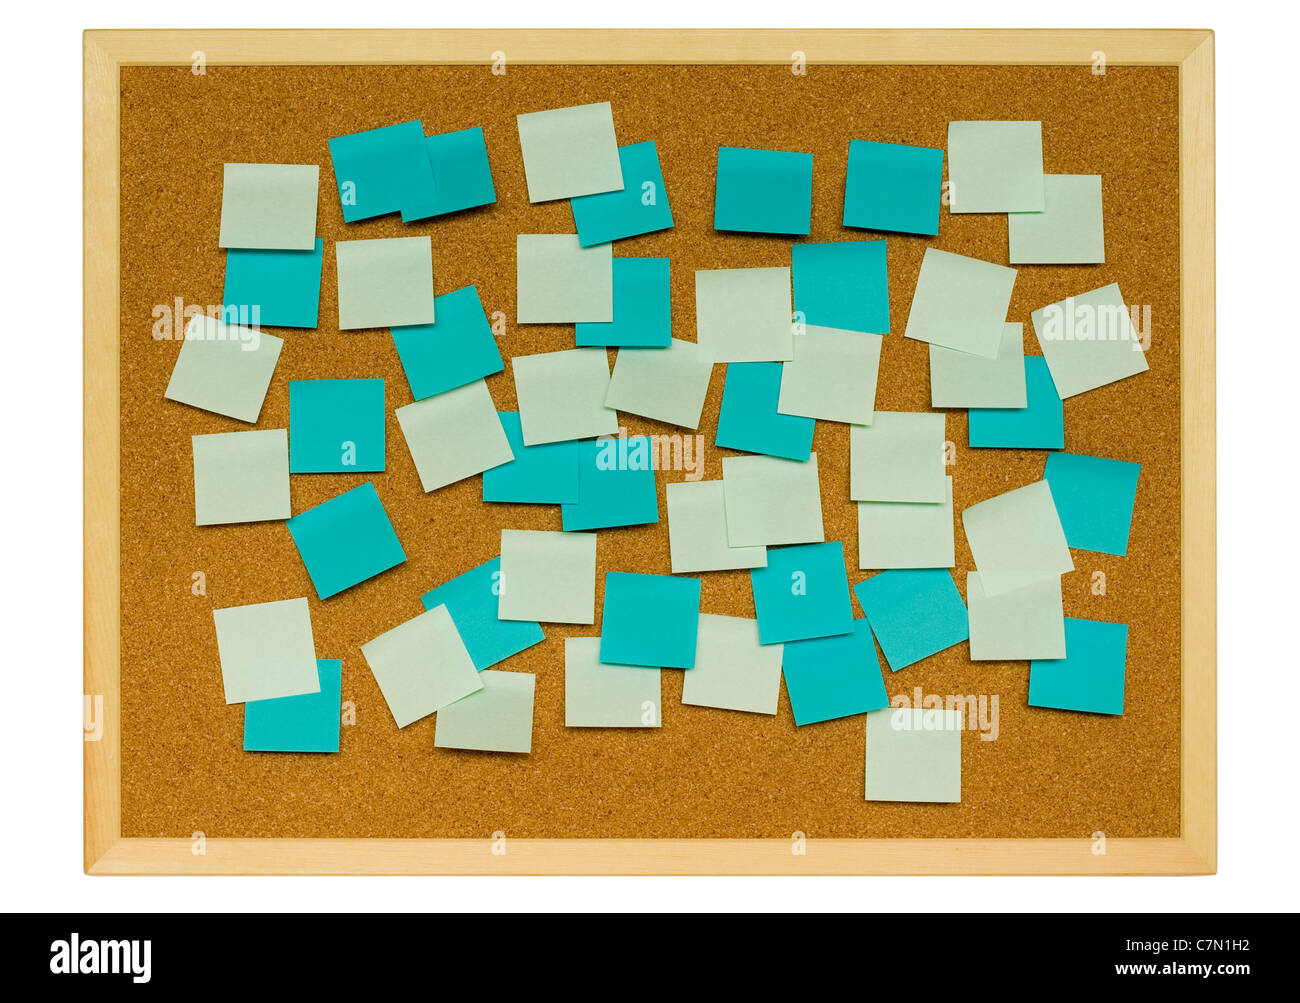 Cork board with lots of sticky notes on it Stock Photo - Alamy